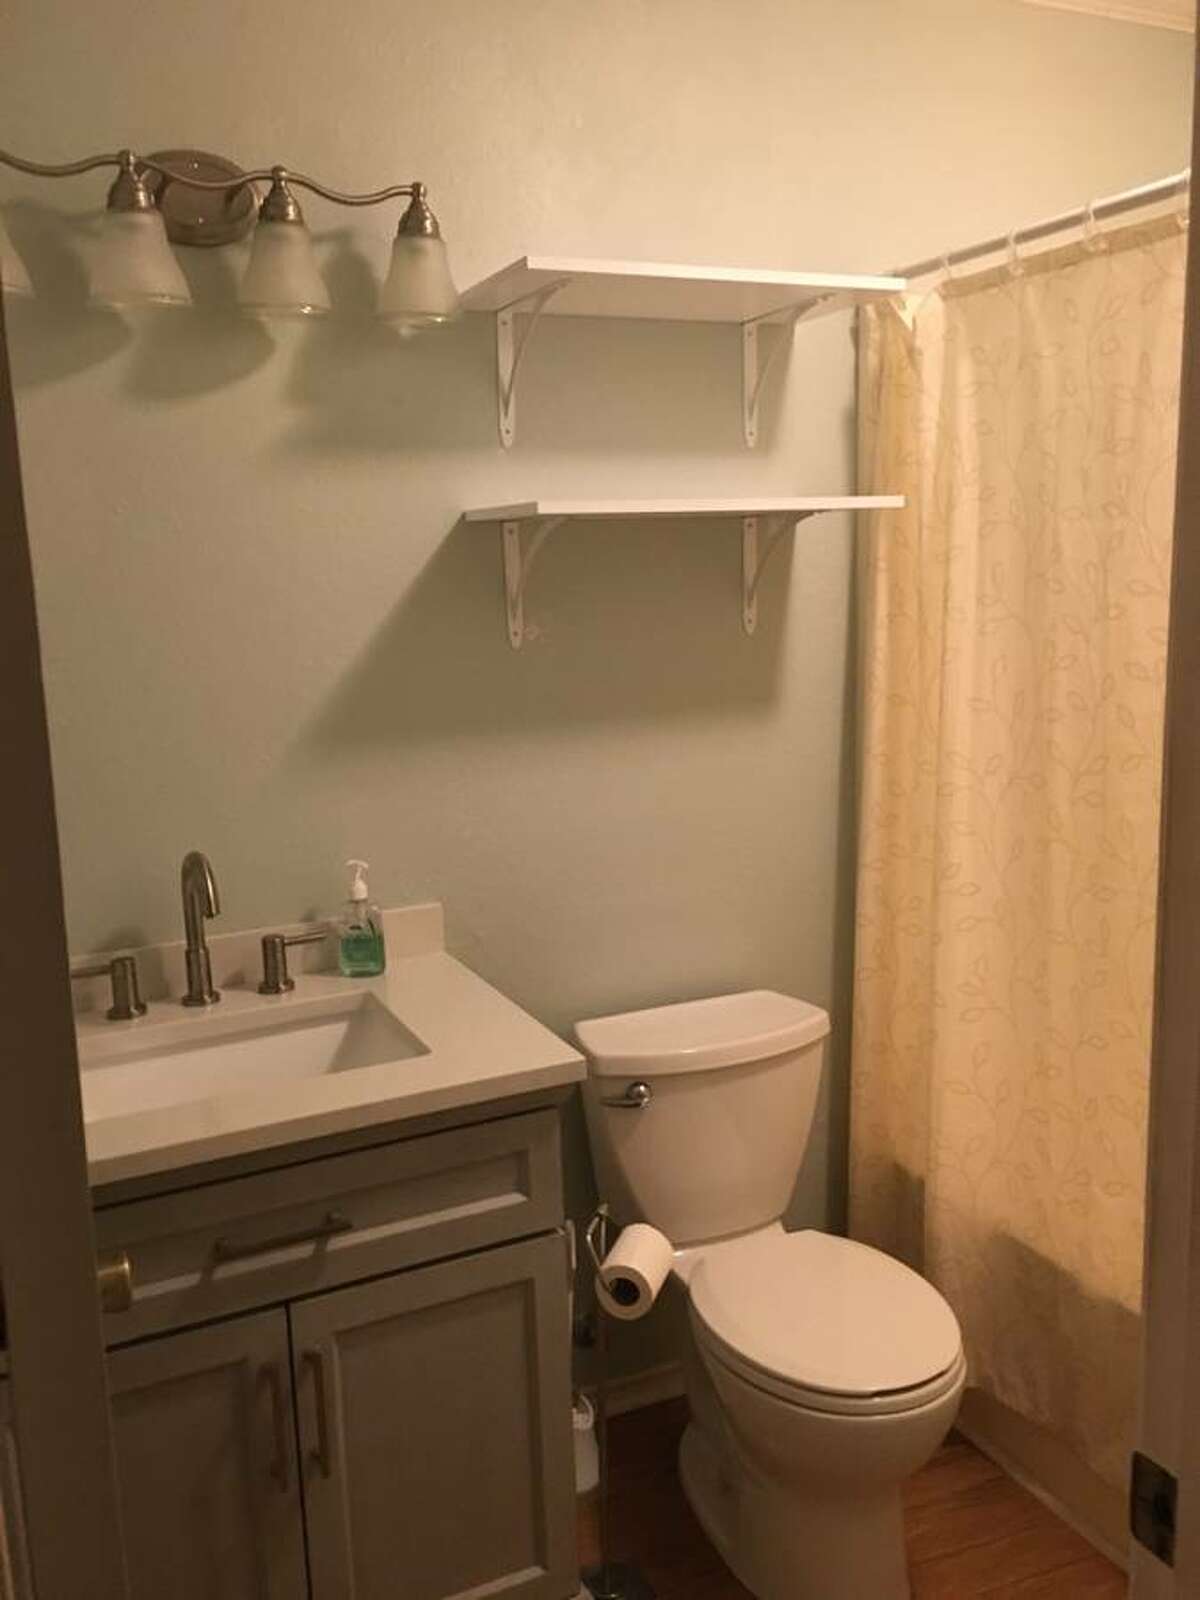 It's a bathroom.  You will get all the business you have done here. 